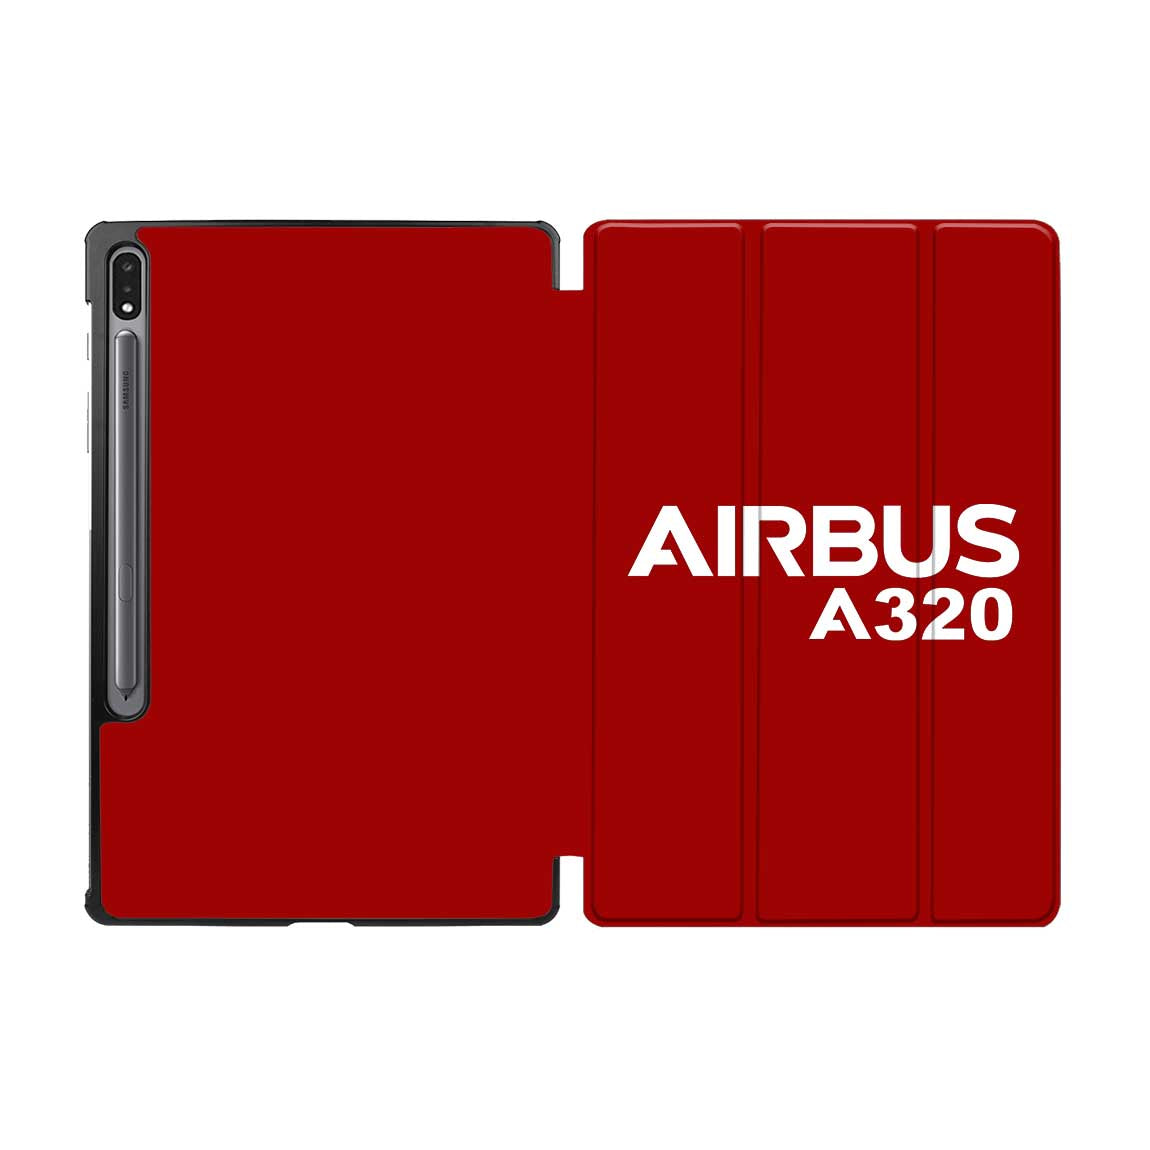 Airbus A320 & Text Designed Samsung Tablet Cases